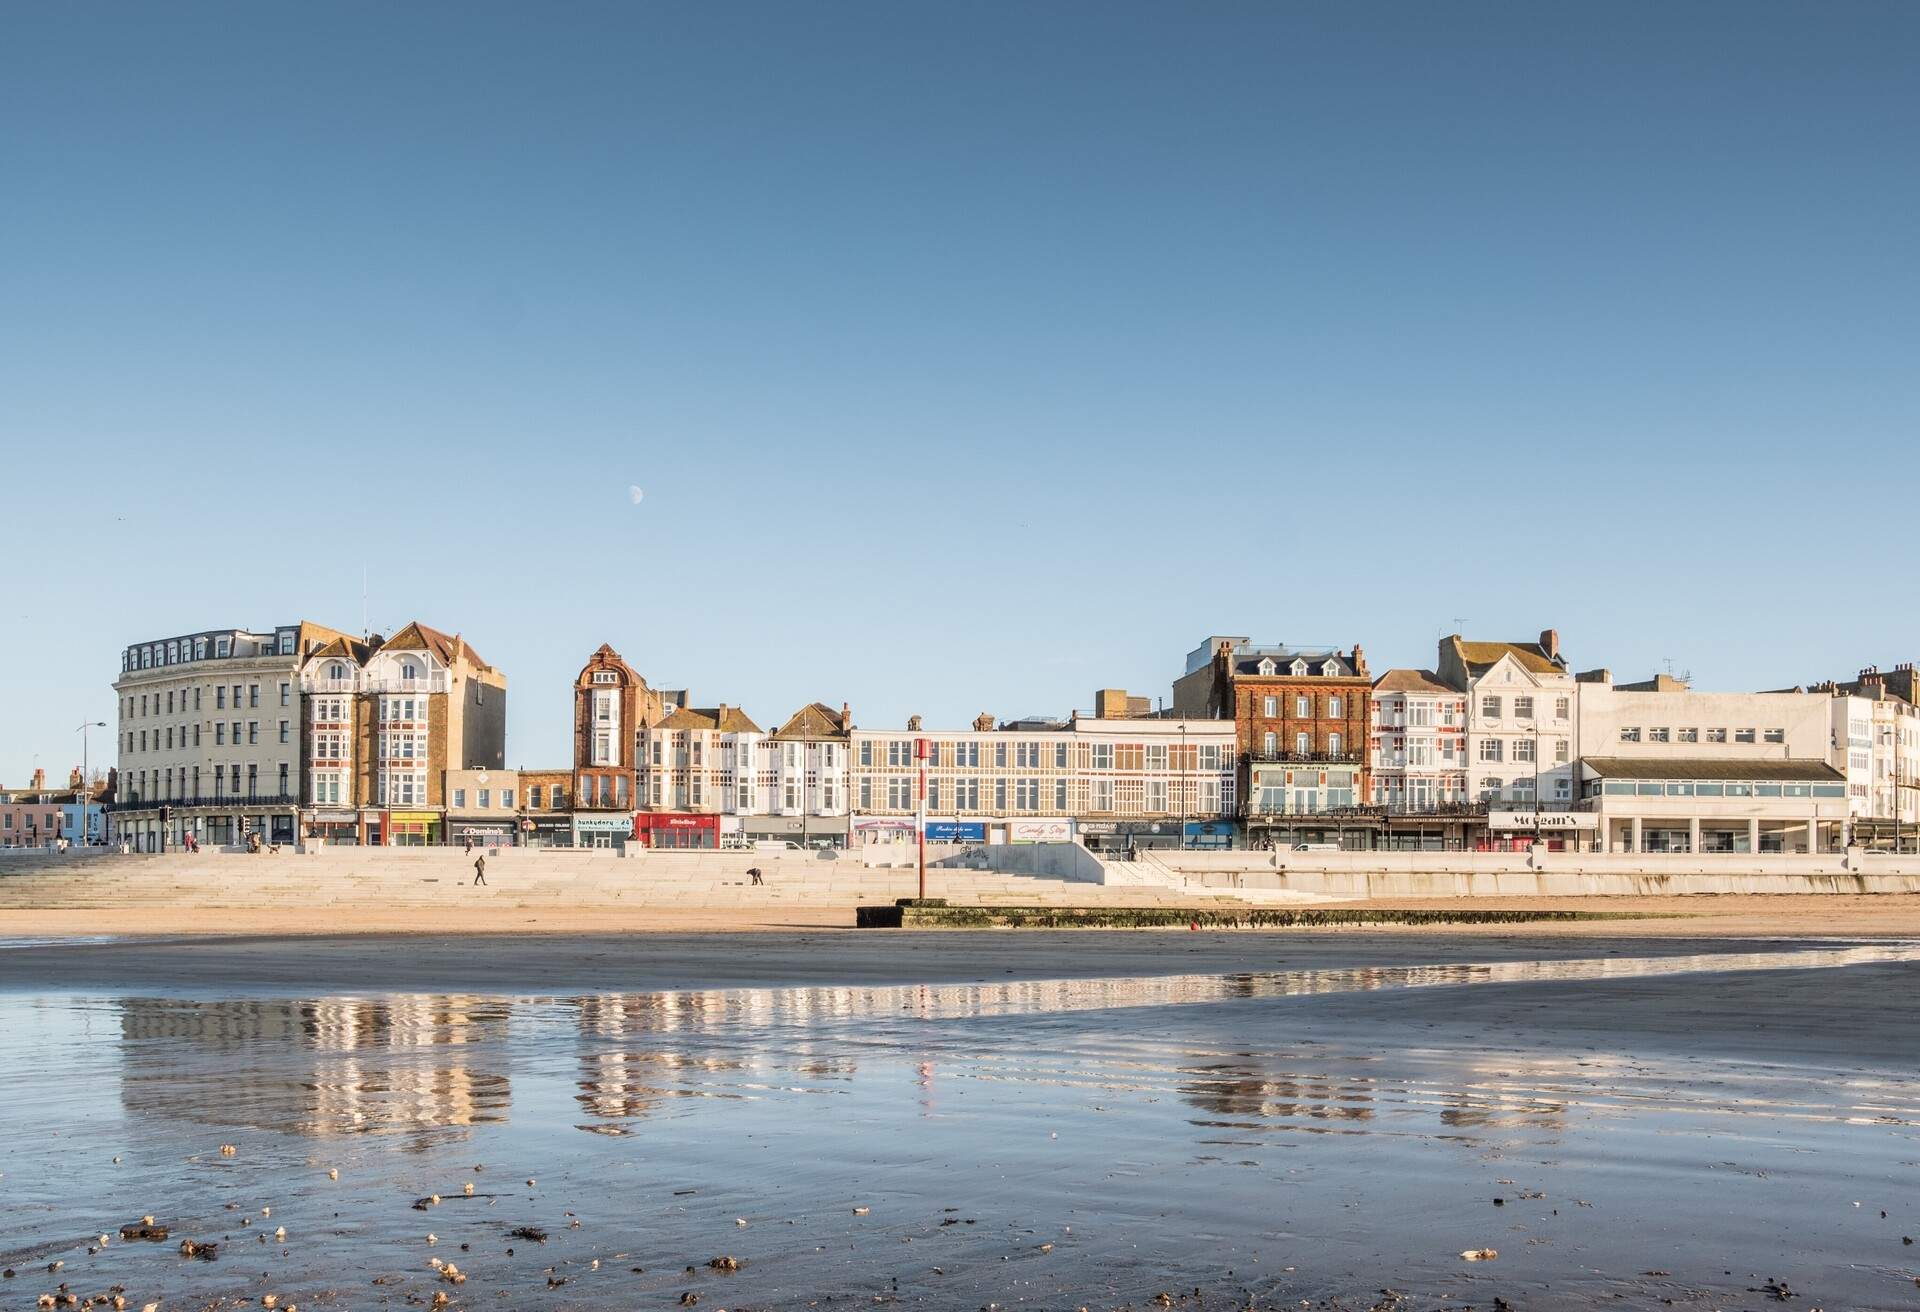 A shore of a beach by the shoal lined with classic and modern buildings against the clear blue sky.